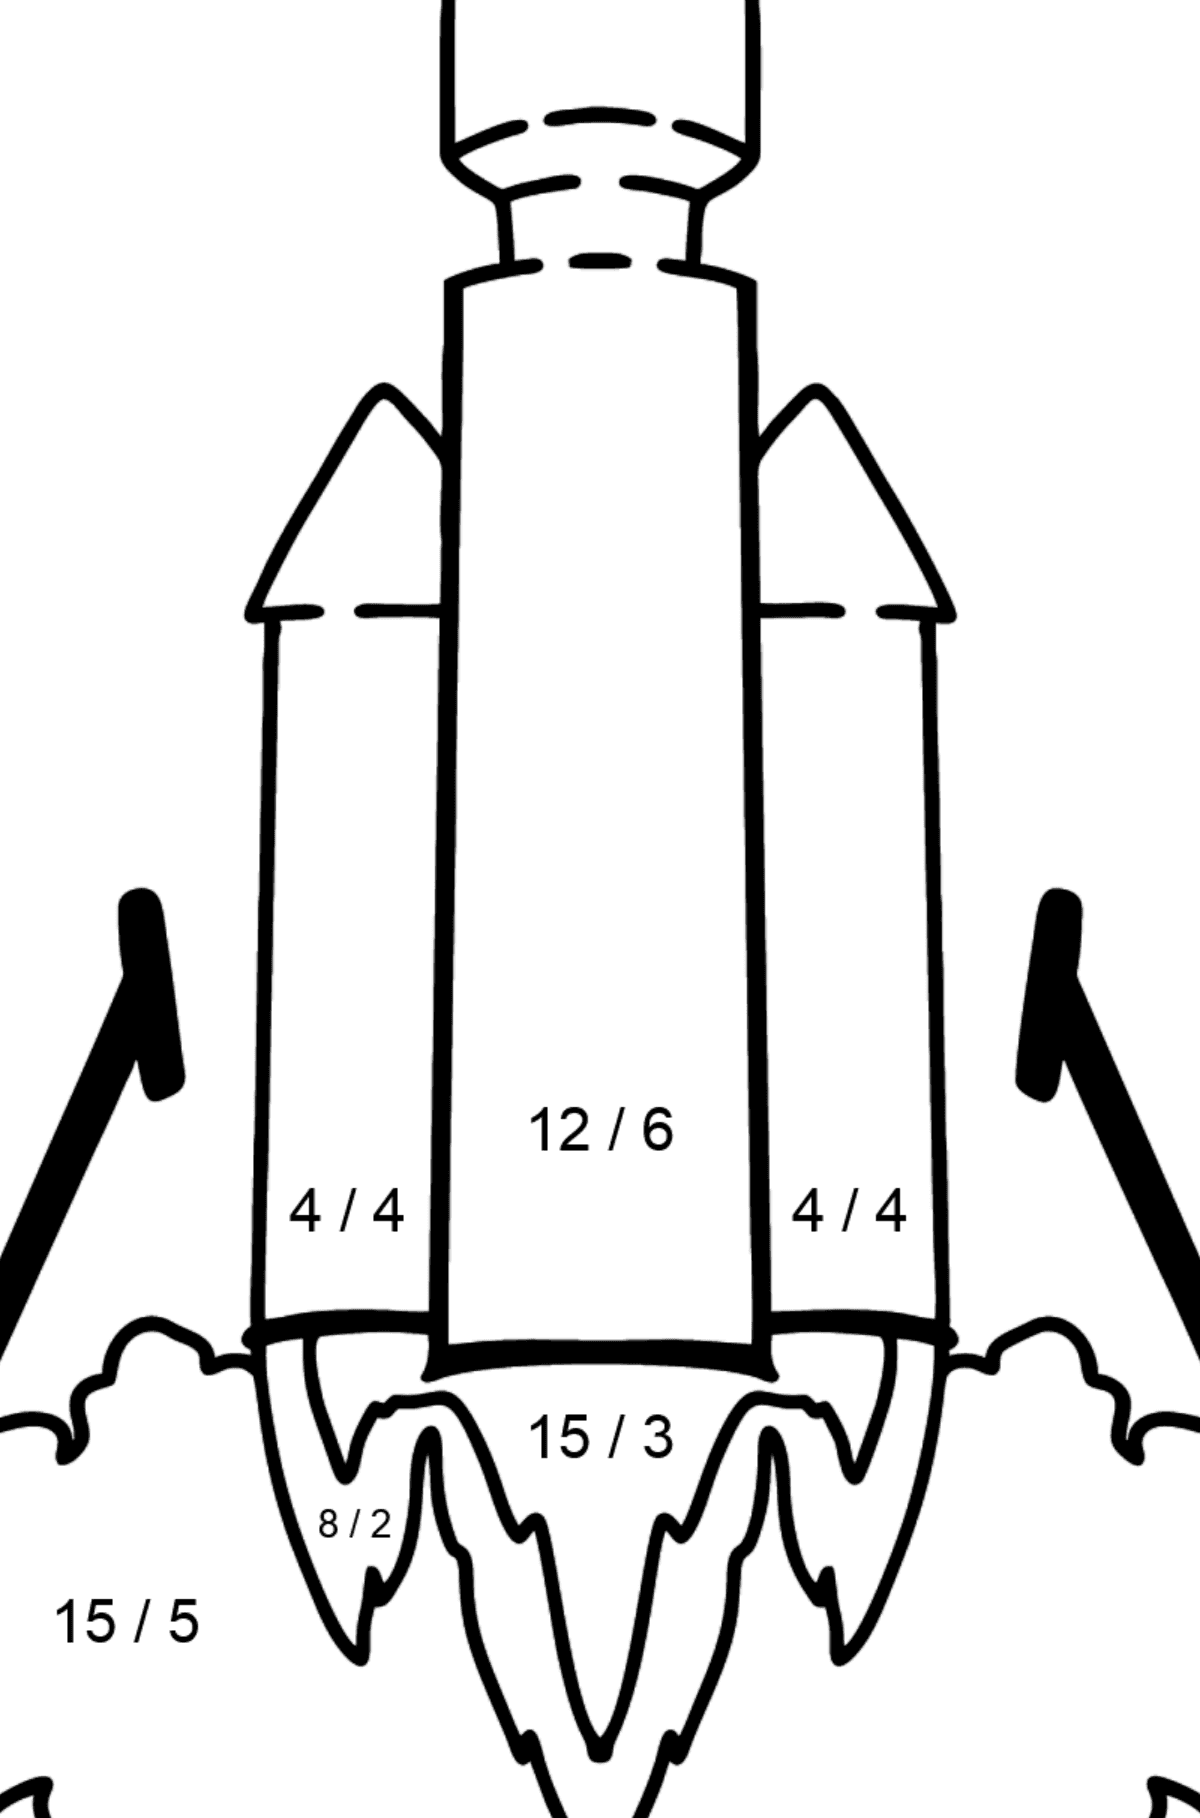 Rocket Launch coloring page - Math Coloring - Division for Kids